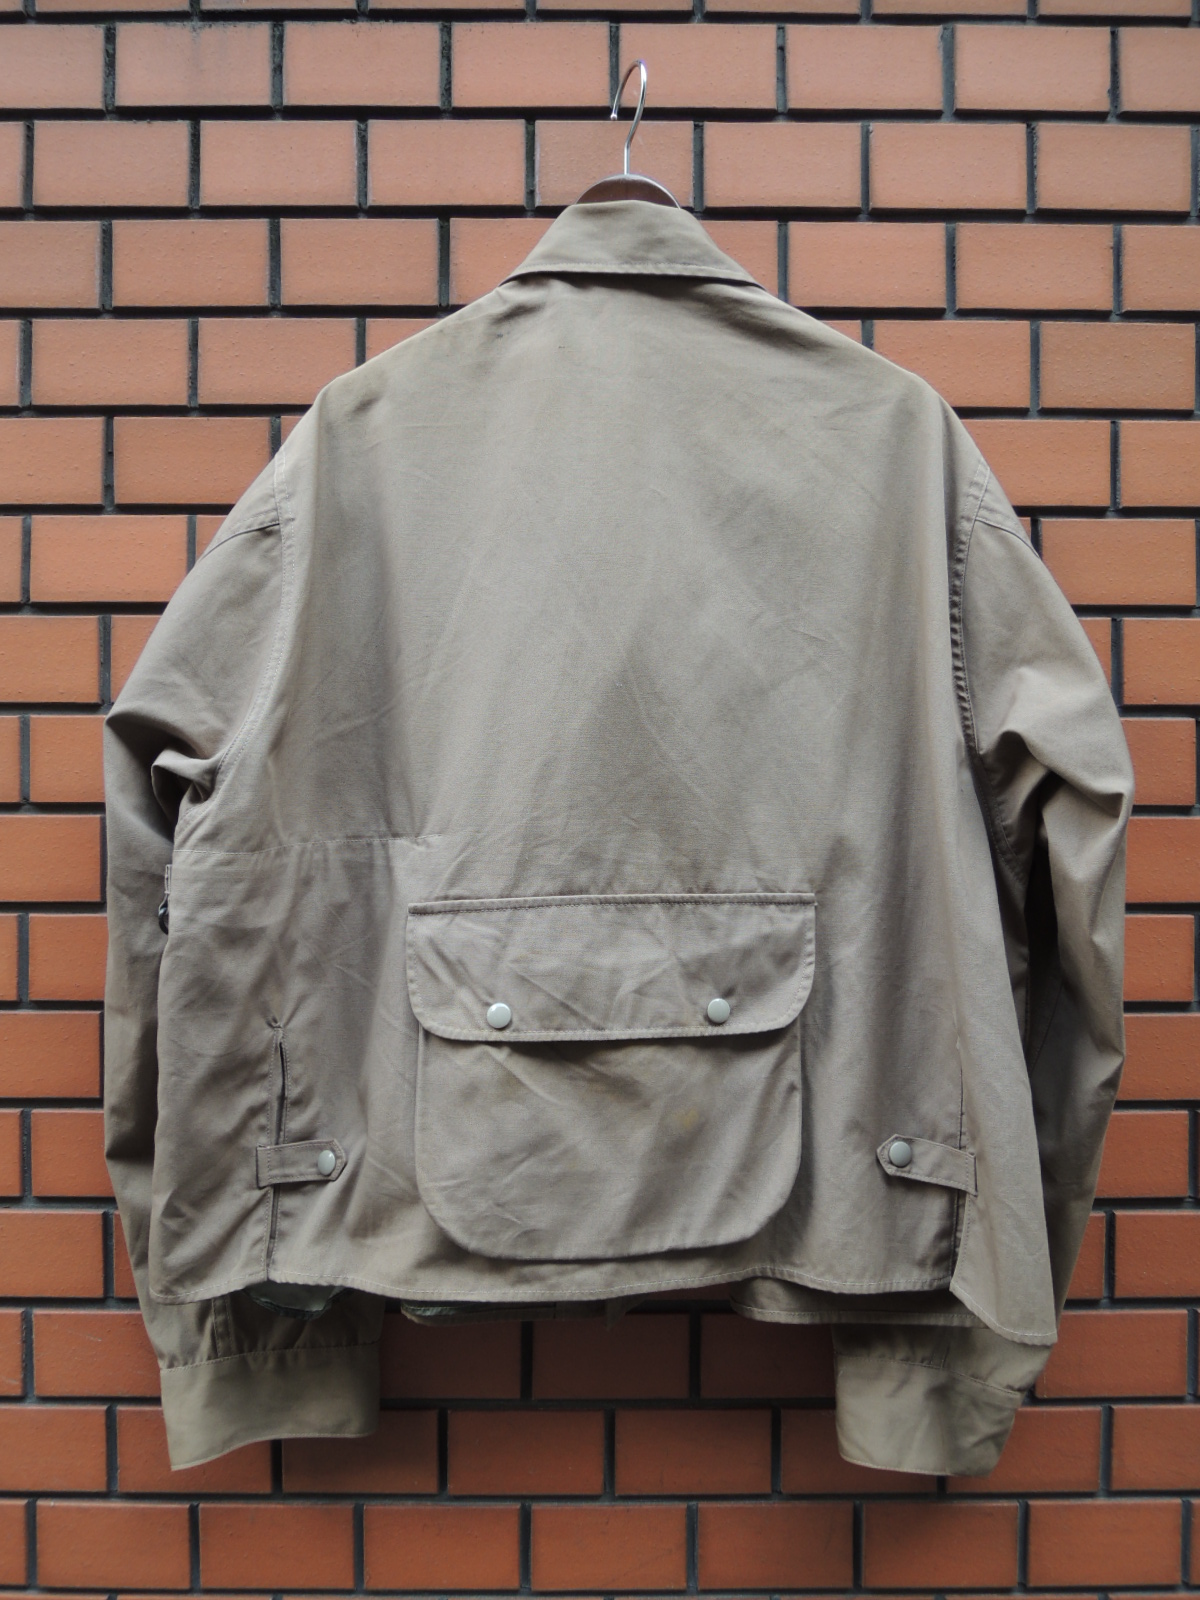 40's fishing jacket: container